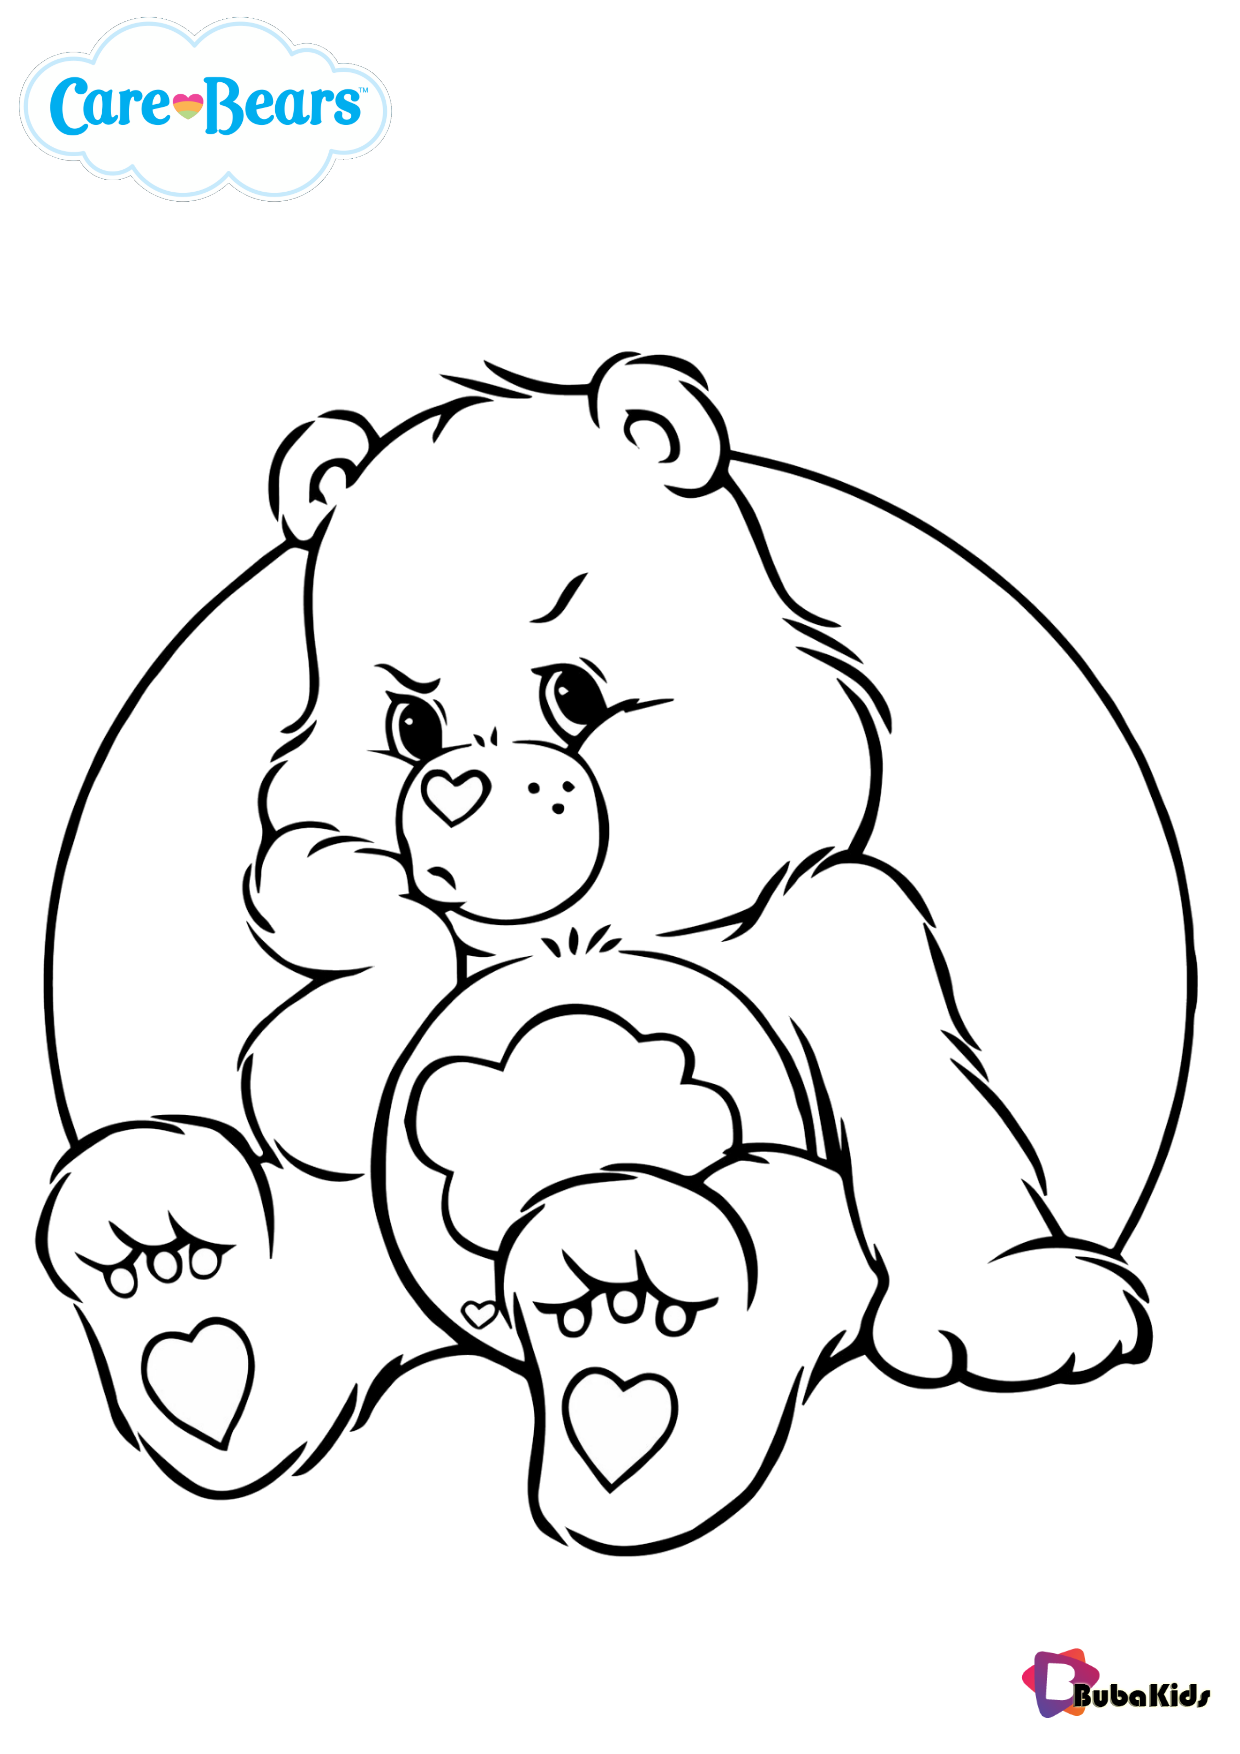 Care Bears Grumpy bear coloring pages Wallpaper